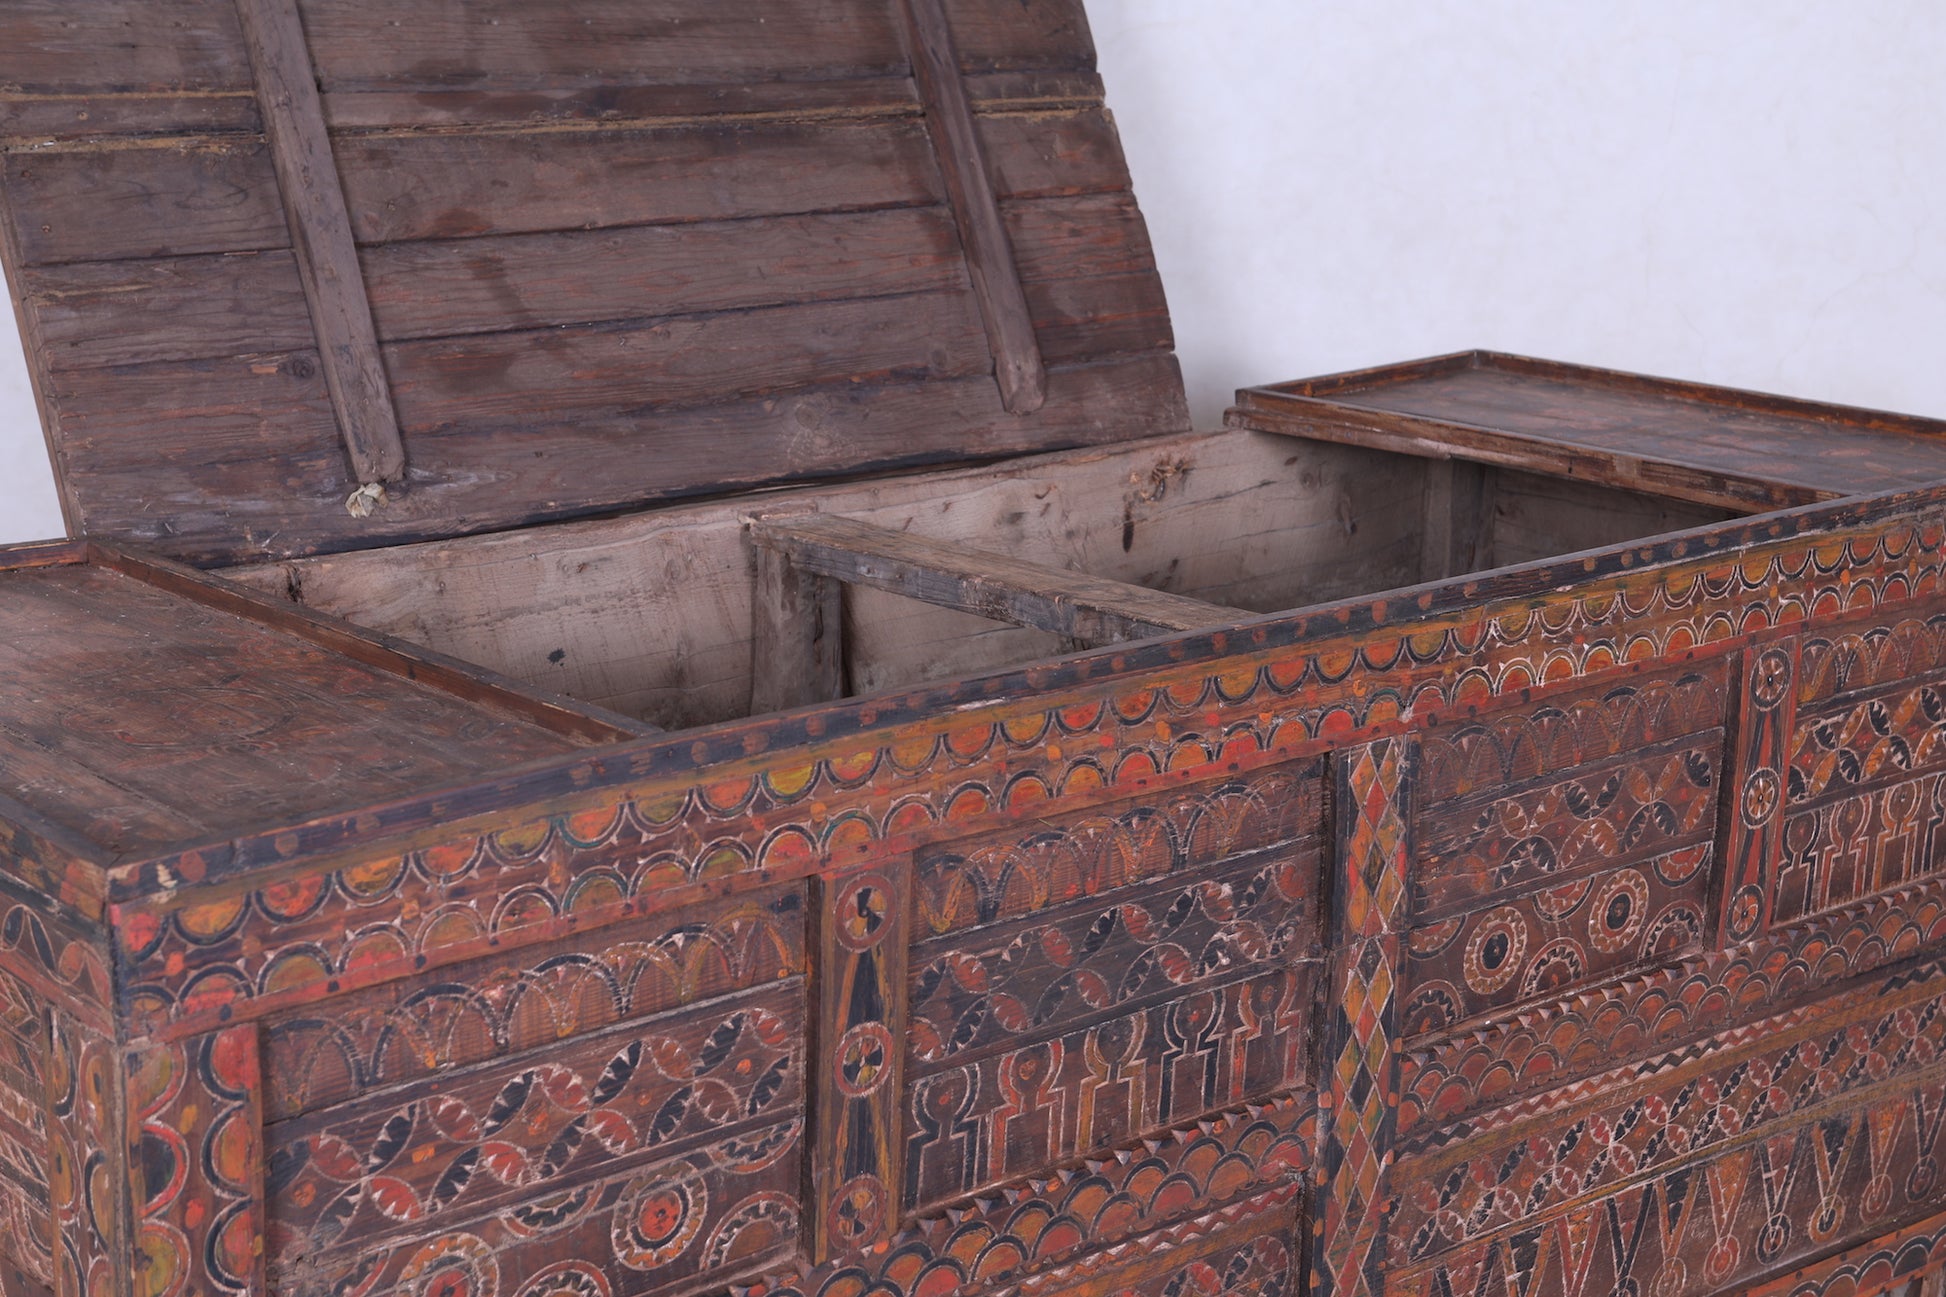 Vintage Moroccan chest H 2.8 FT x W 6.5 FT x D 2.6 FT - wood chest